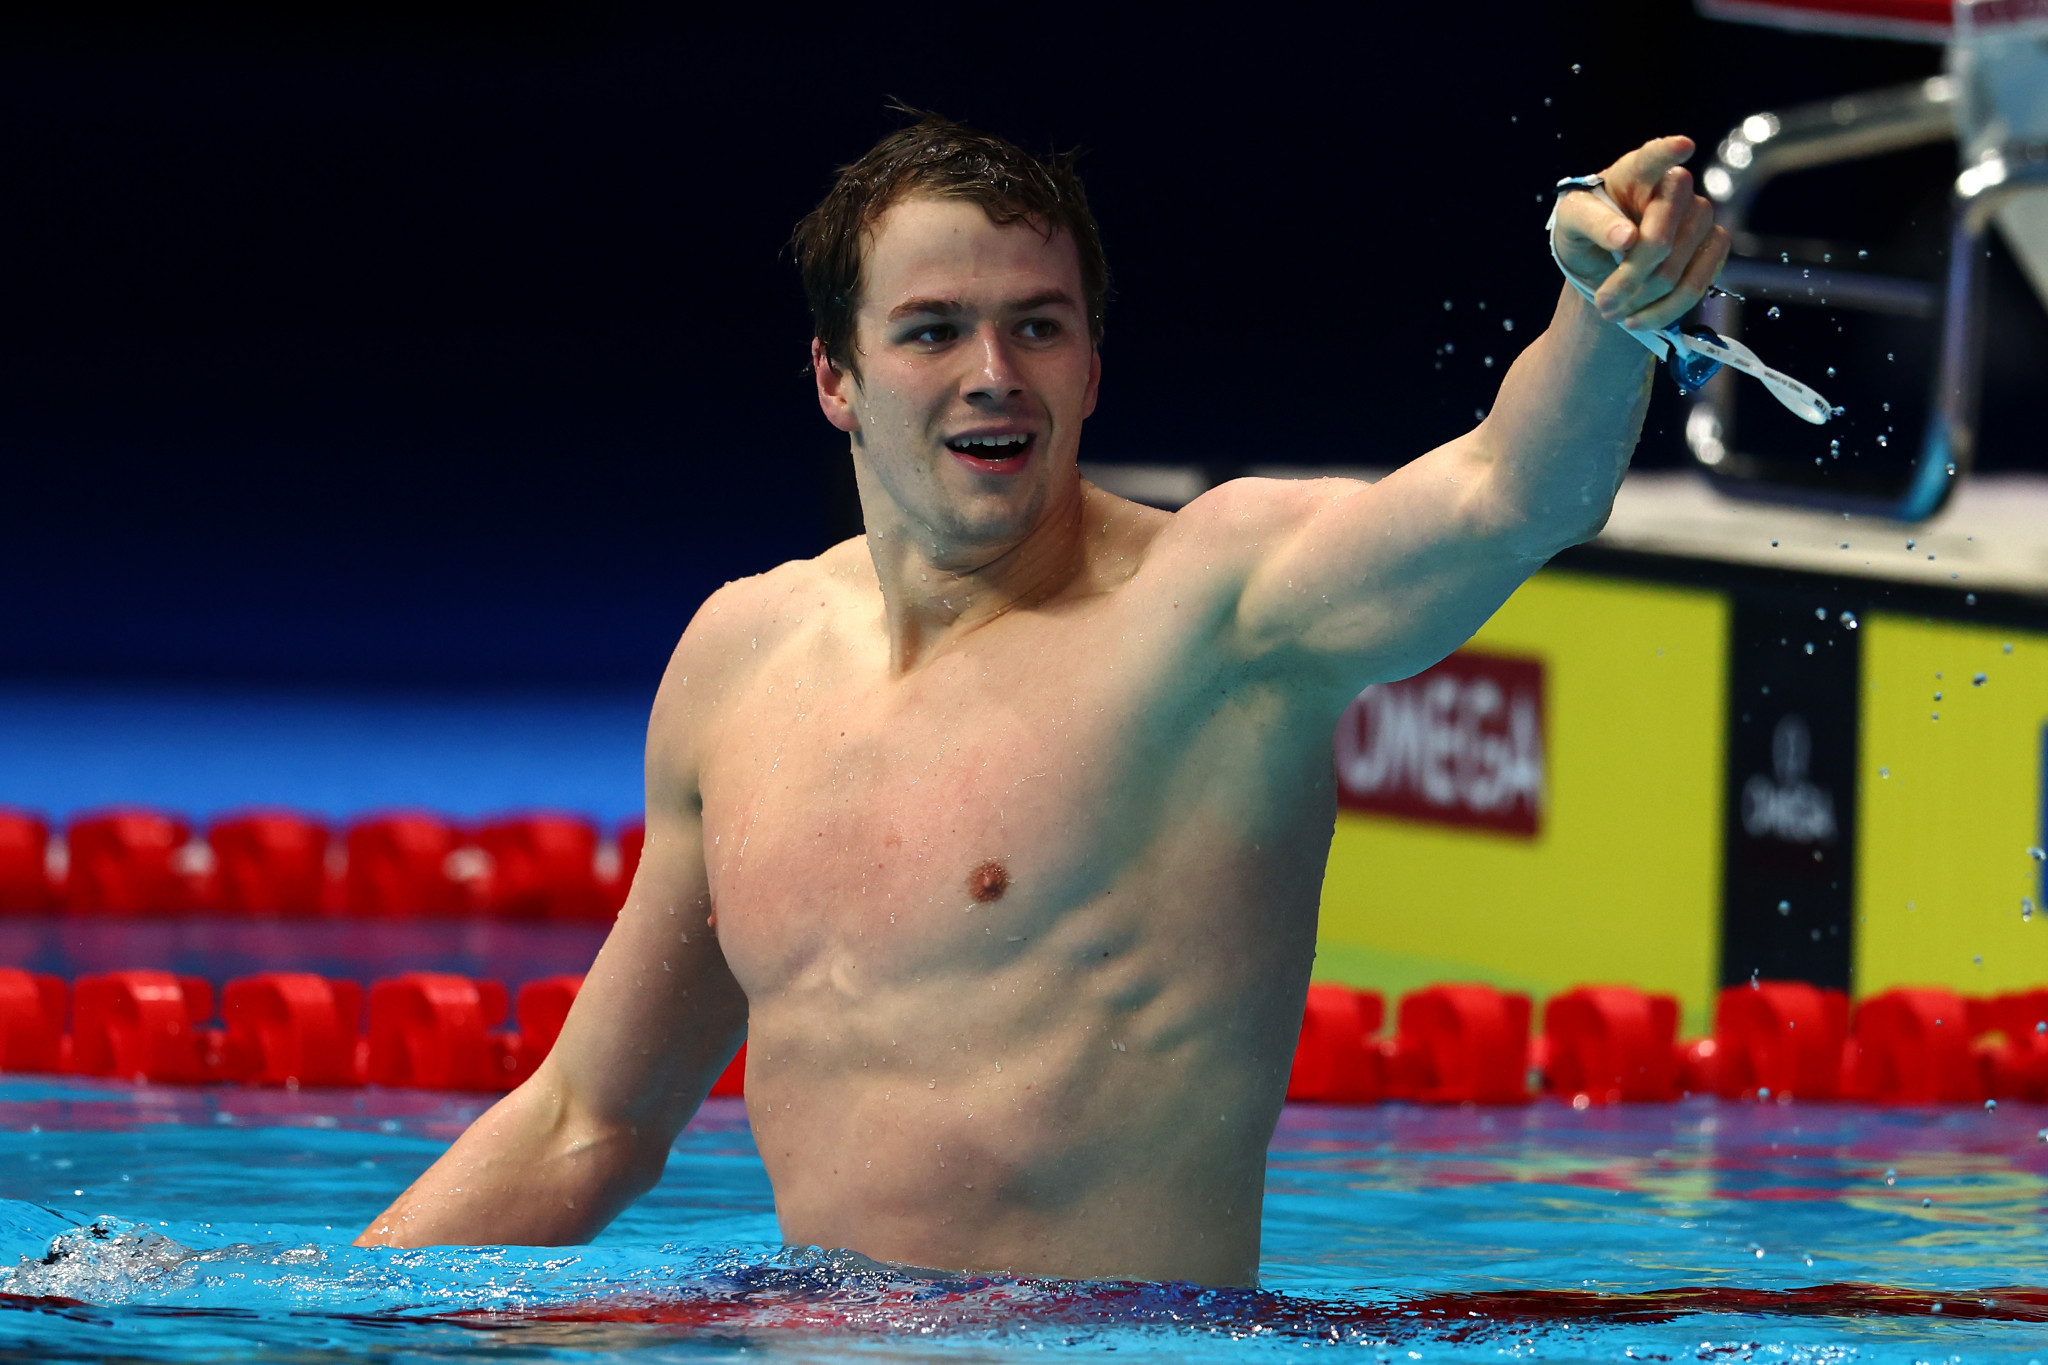 Nic Fink won the men's 200m breaststroke title as the United States bagged two gold medals today ©Getty Images